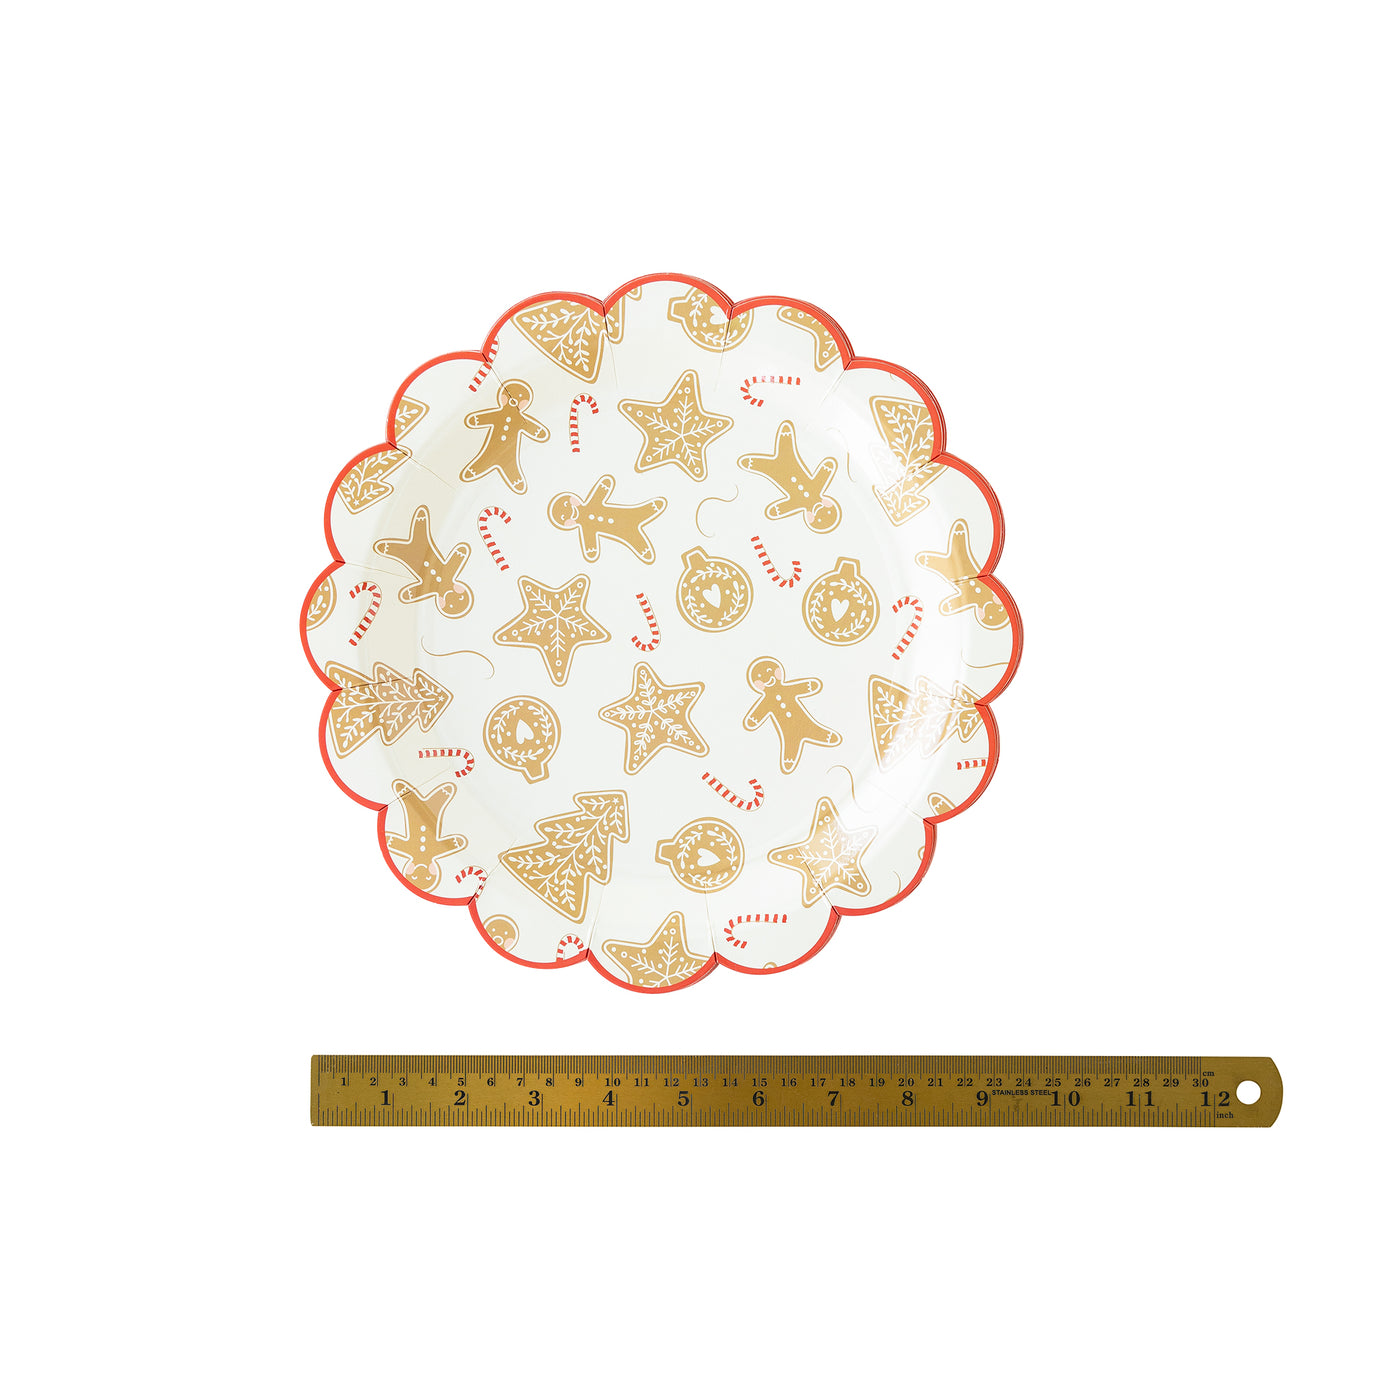 PLTS392A - Cream Gingerbread Cookie Paper Plate